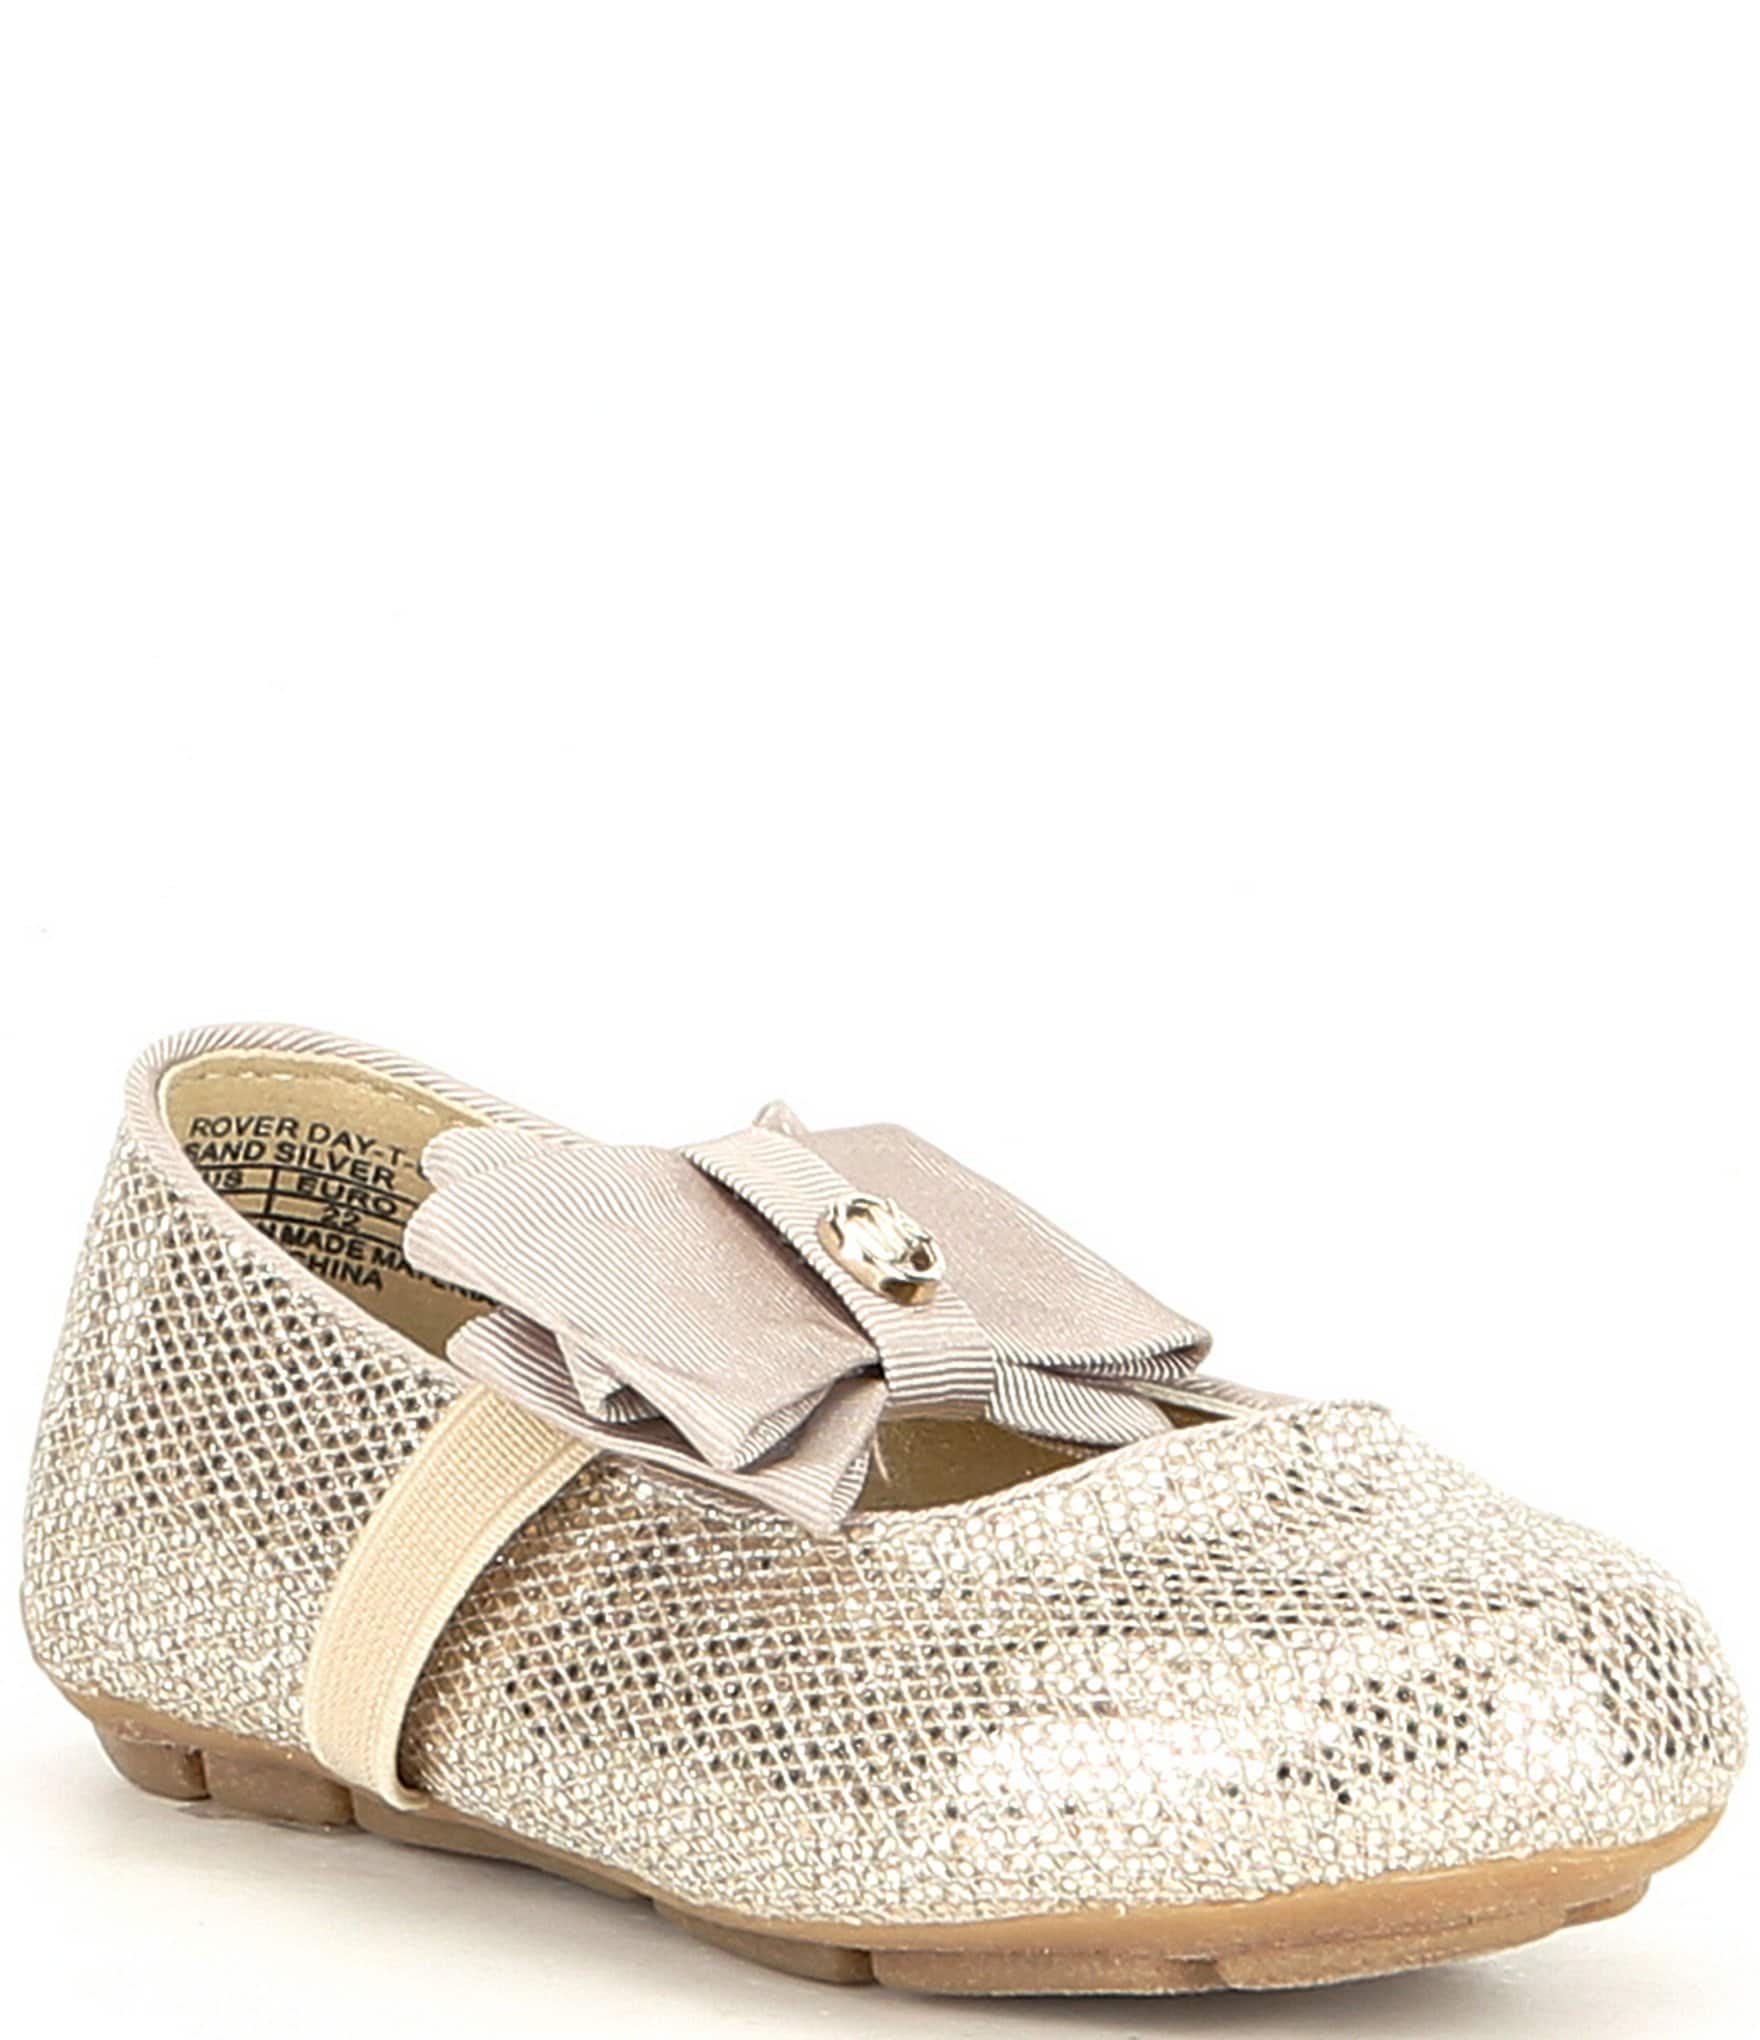 gold flat shoes for toddlers